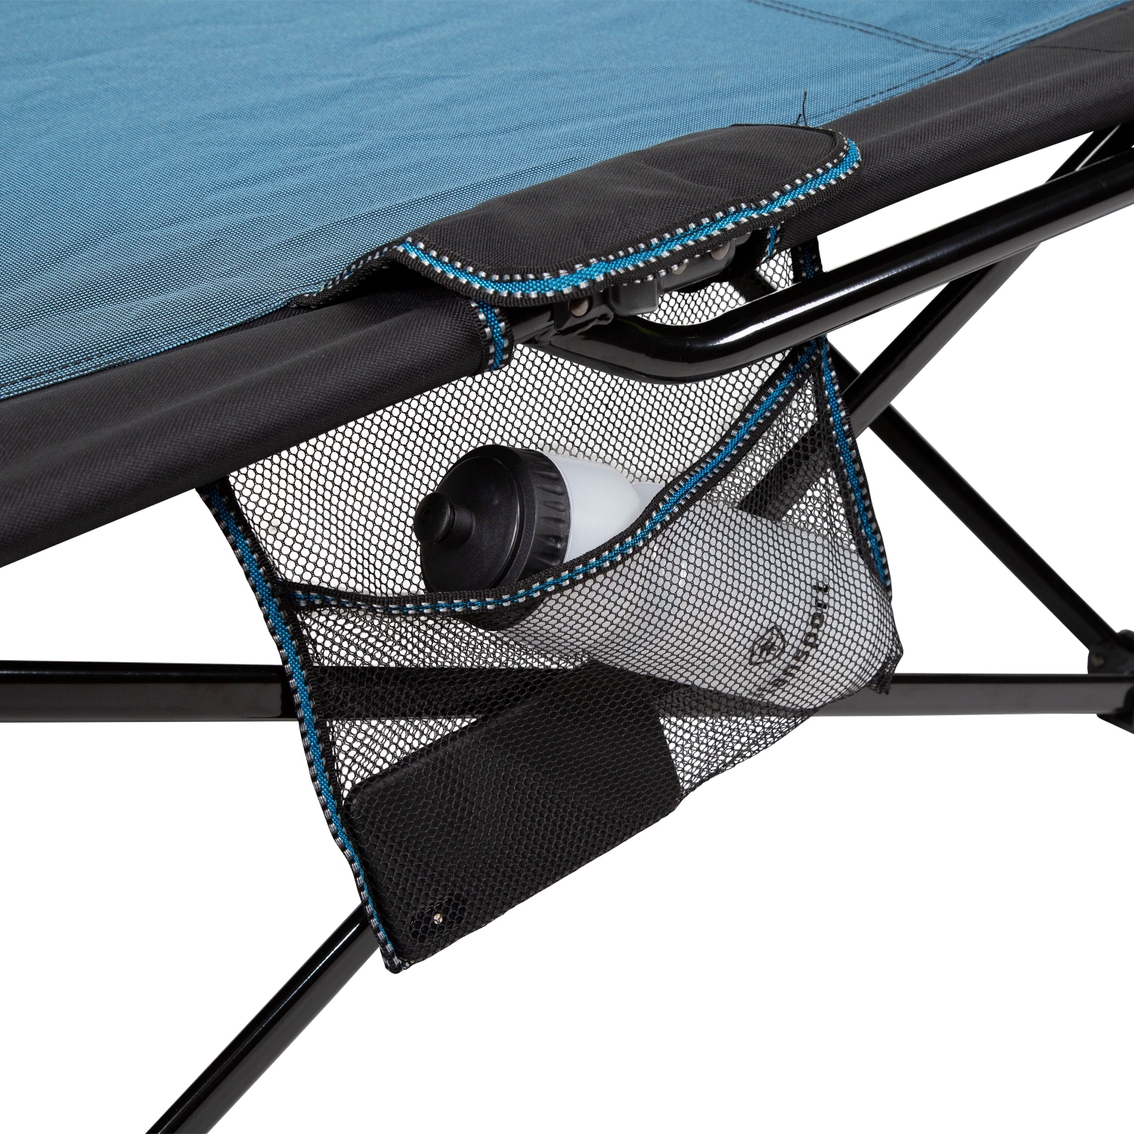 Stansport Heavy Duty Camp Cot - Image 3 of 5